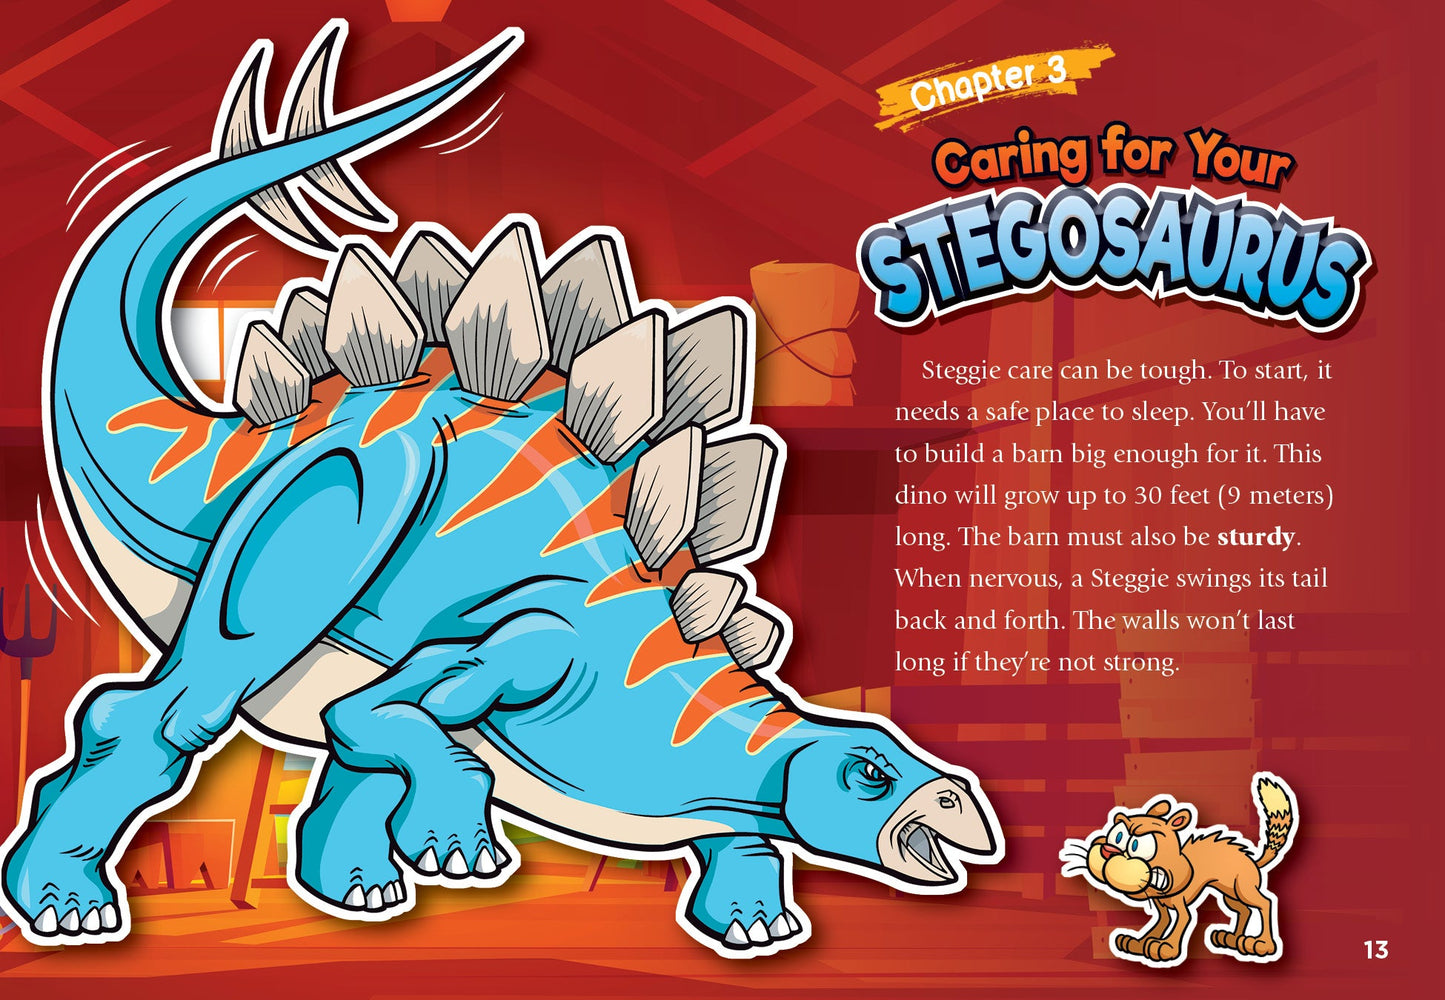 Caring for Your Pet Dinosaur: Taking Care of Your Stegosaurus